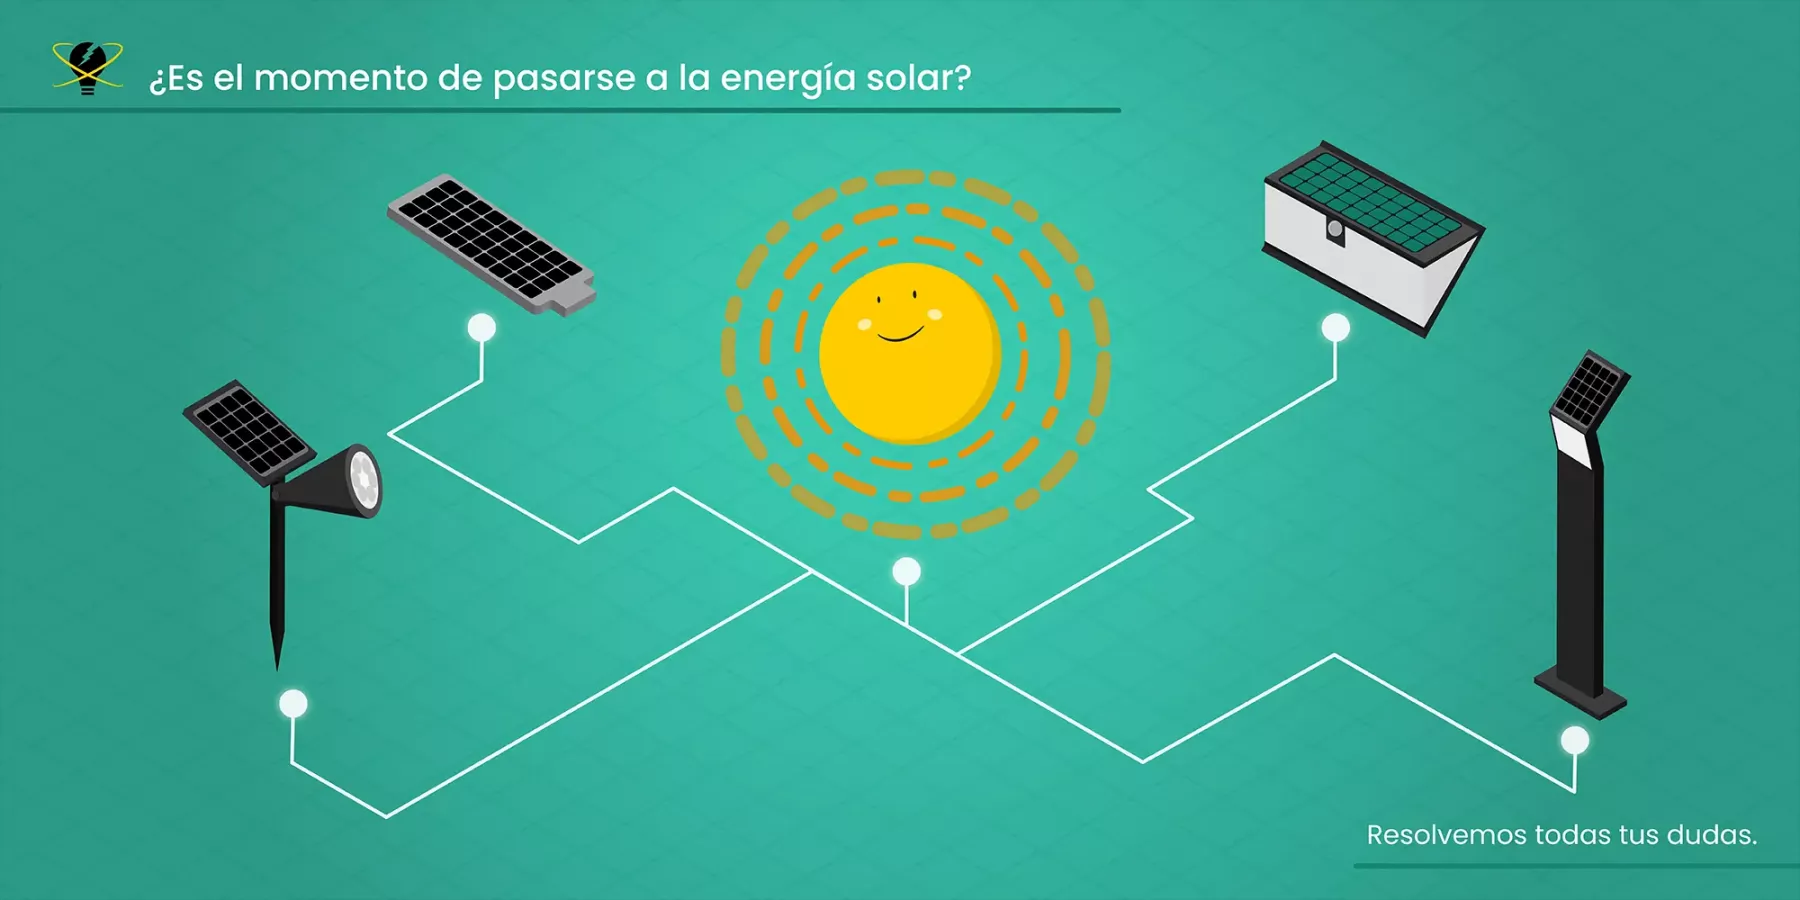 Solar energy, Is it time for a change?